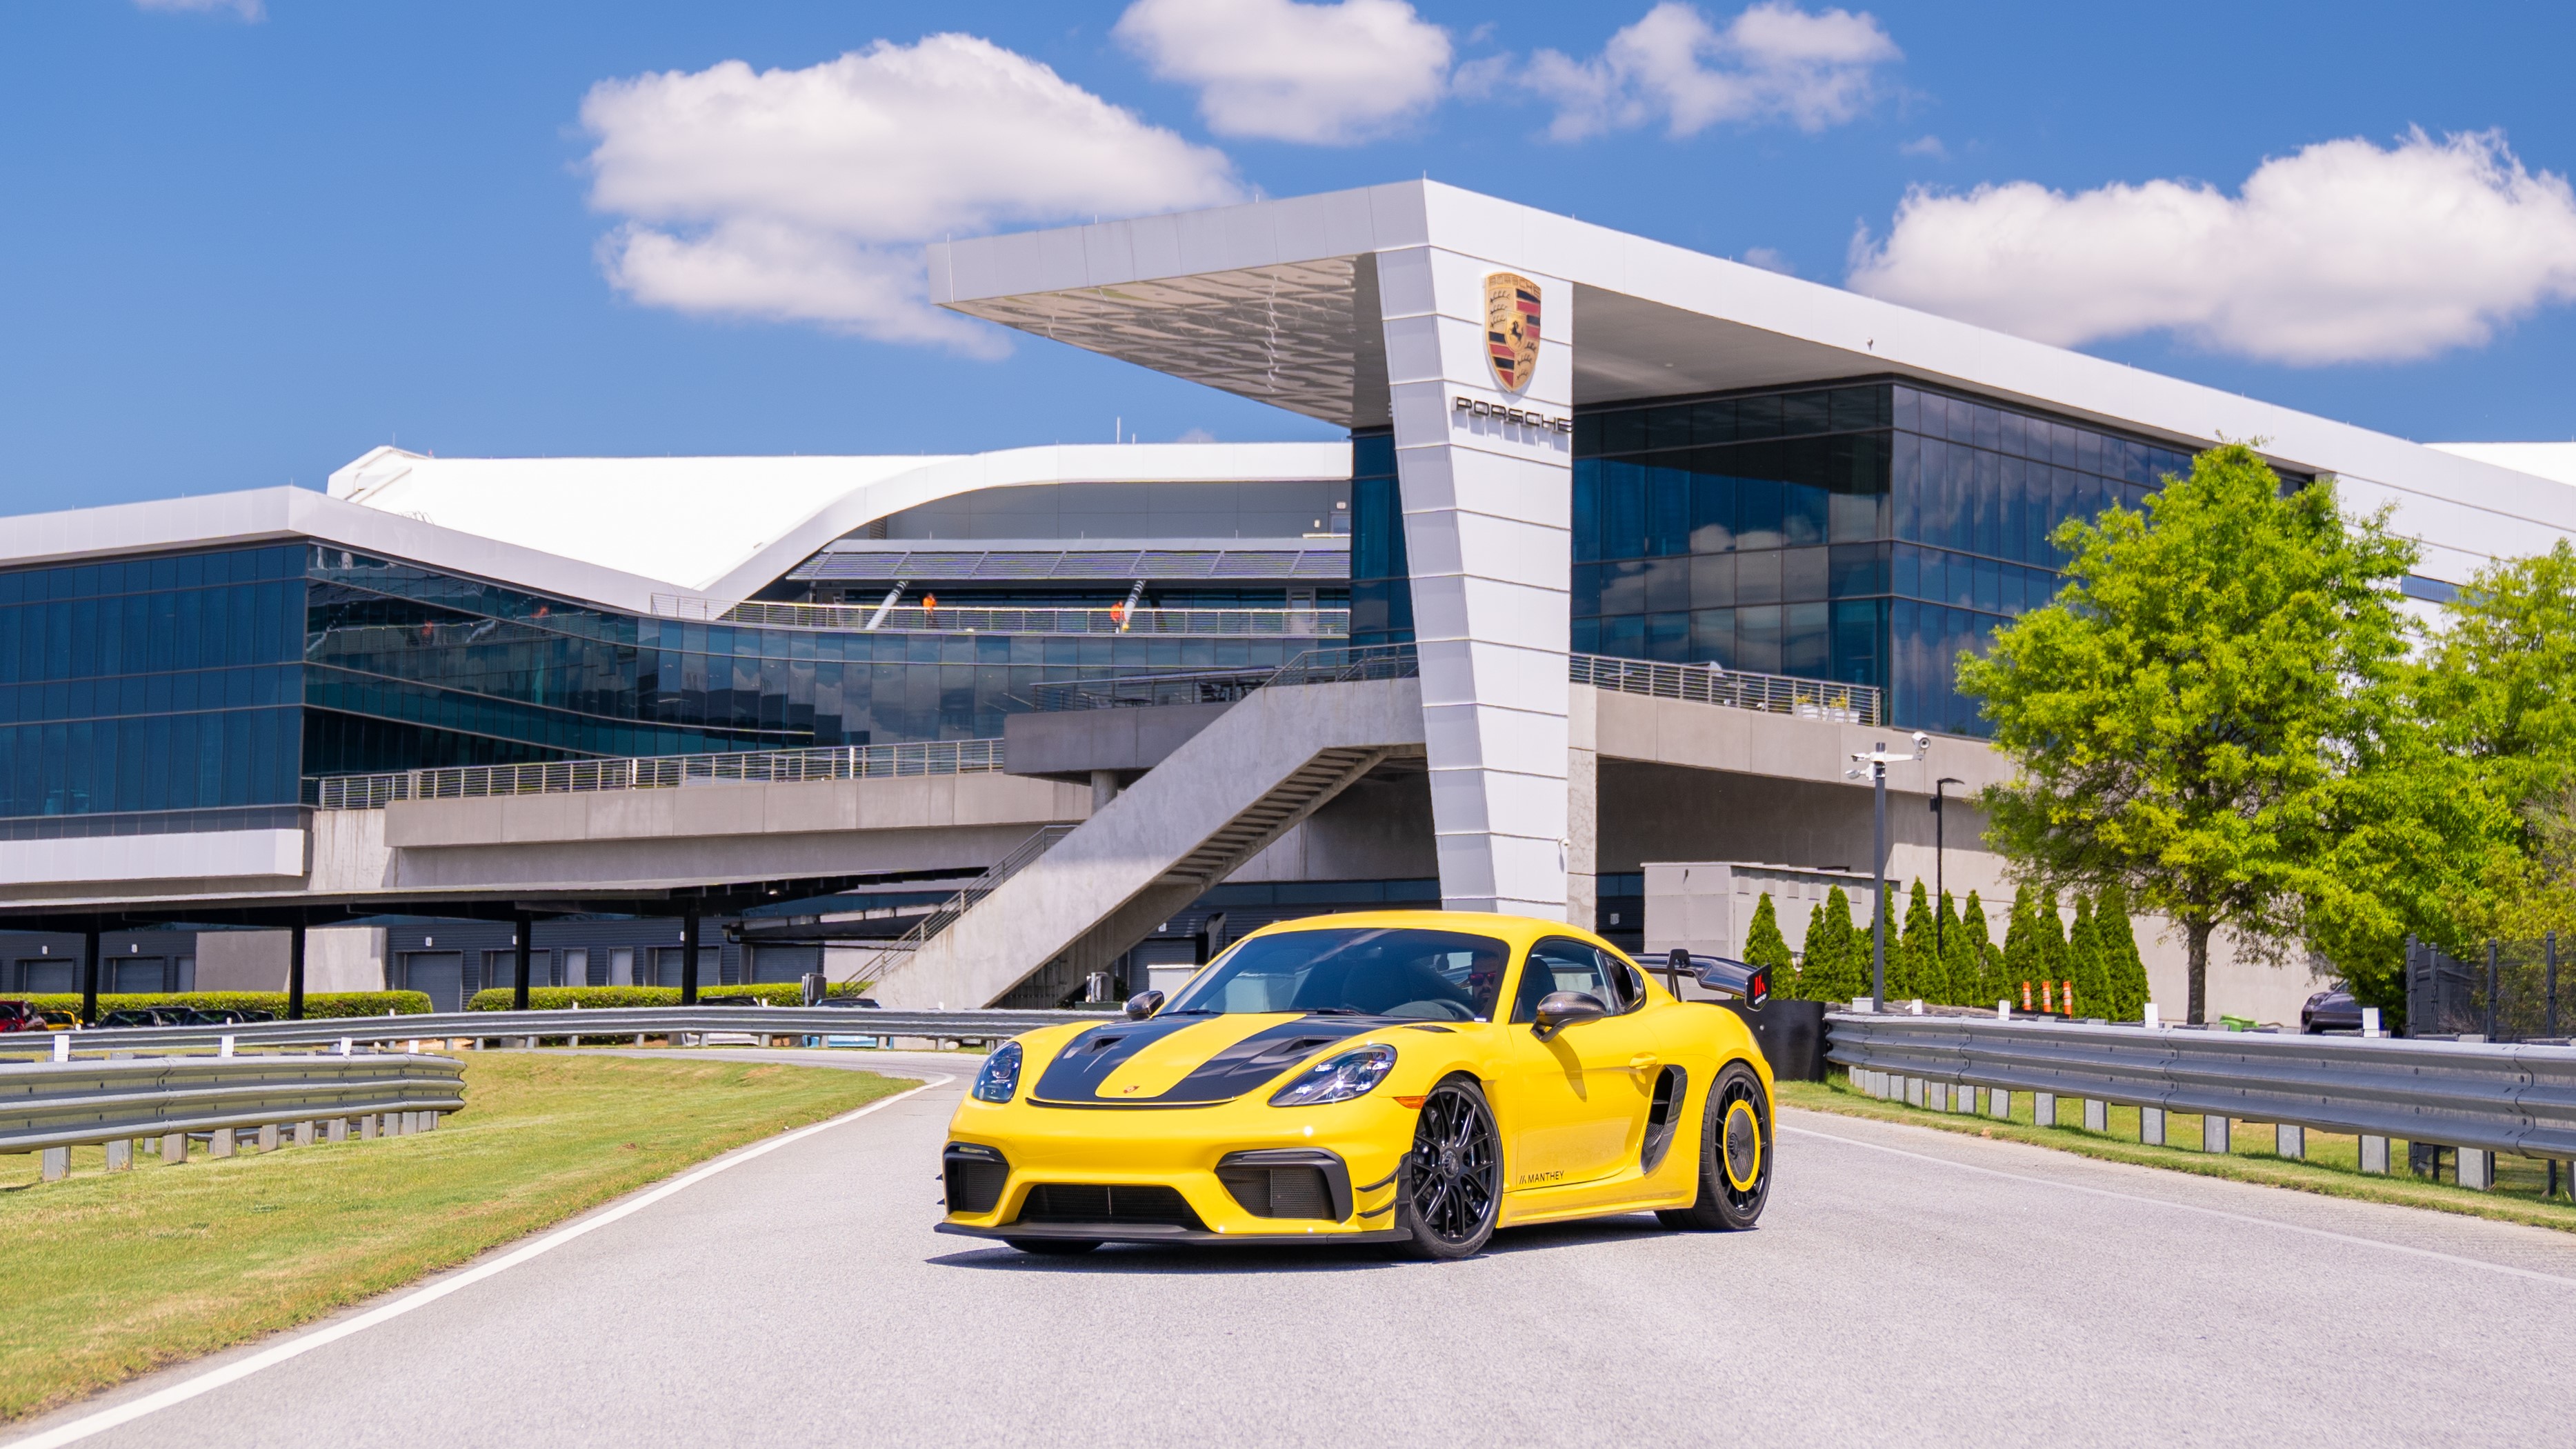 Porsche 718 Cayman GT4 RS equipped with Manthey Kit on the South track at the Porsche Experience Center Atlanta